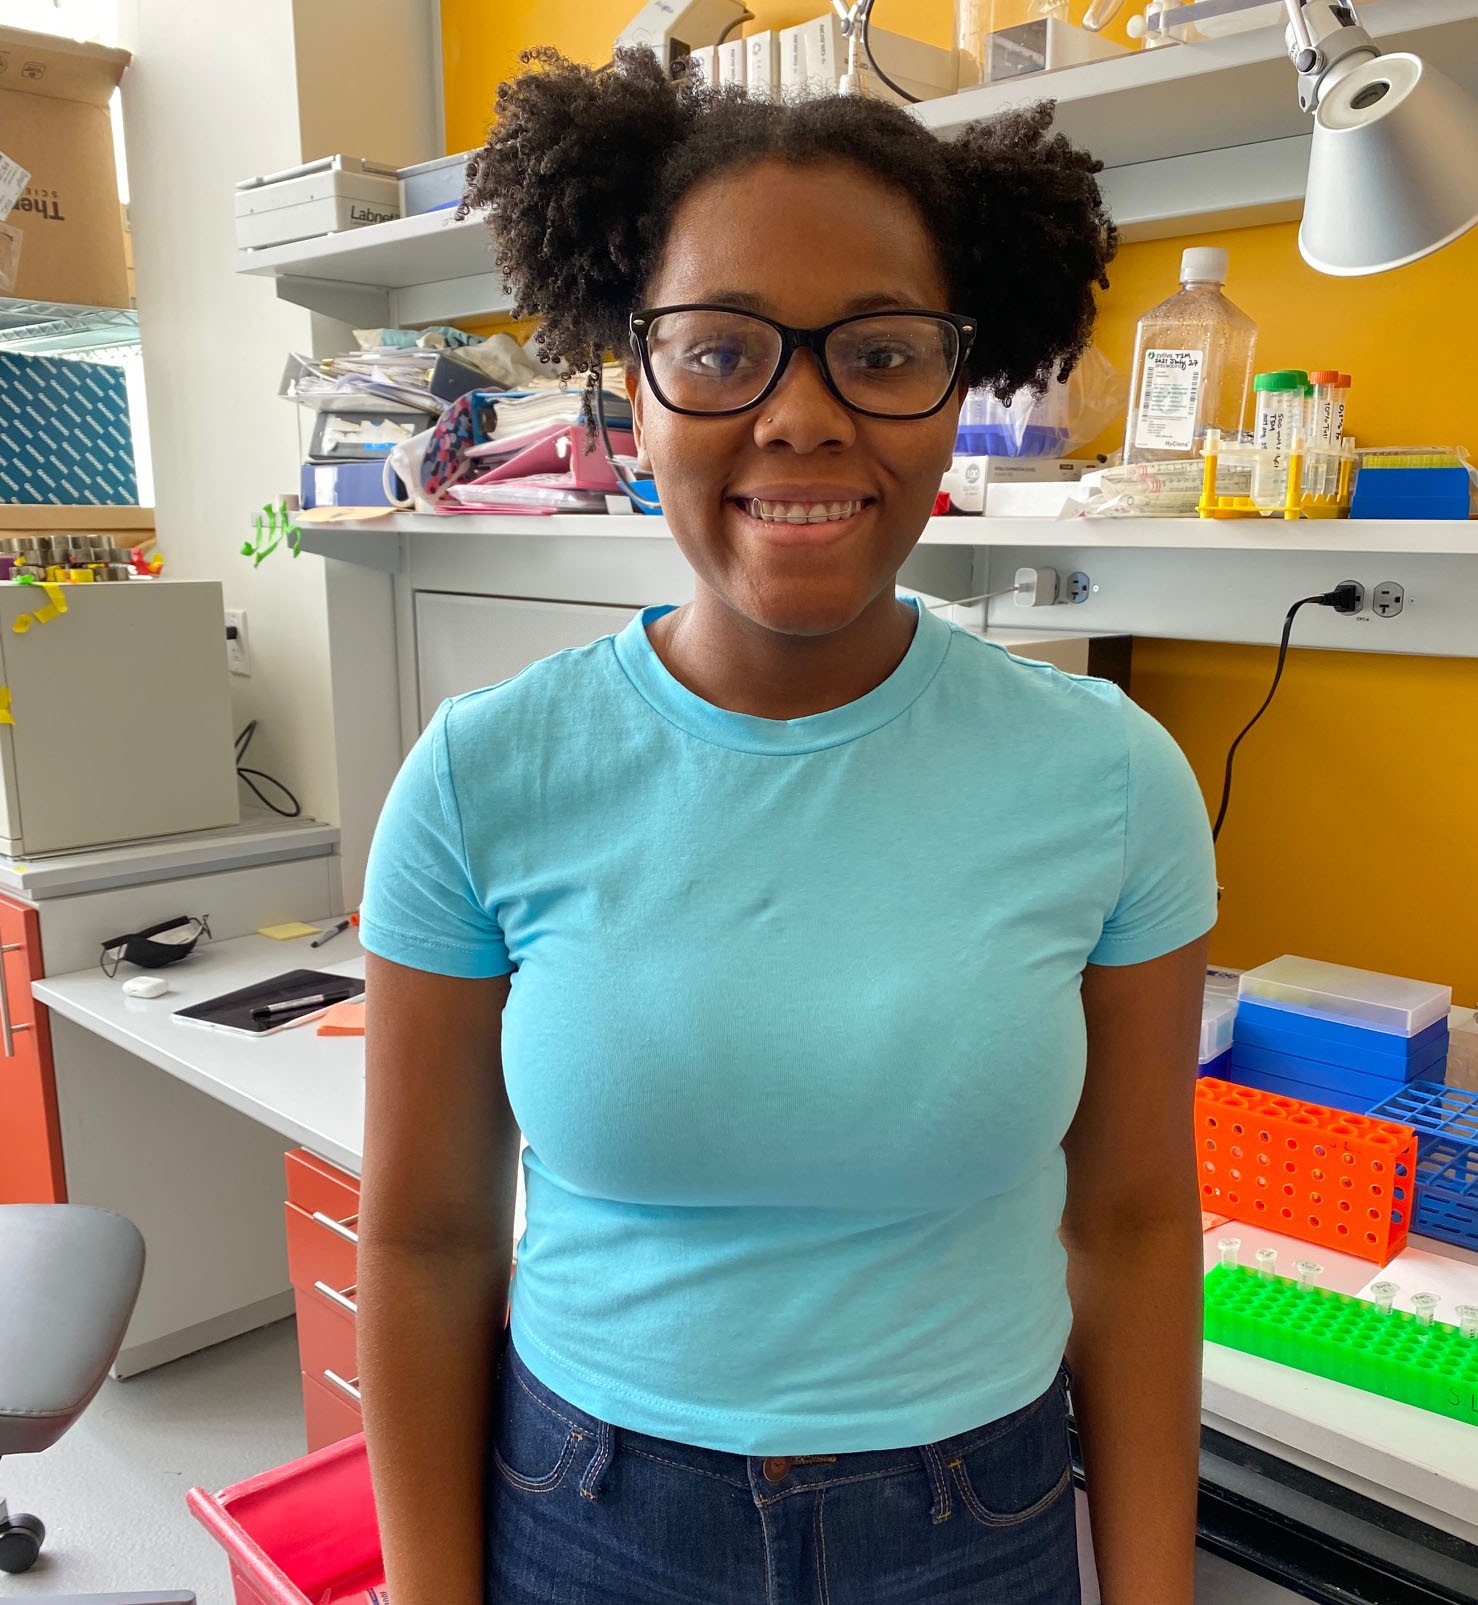 Joanne is wearing a teal tee and standing in front of her bench, with colorful eppendorf racks filled with tubes.